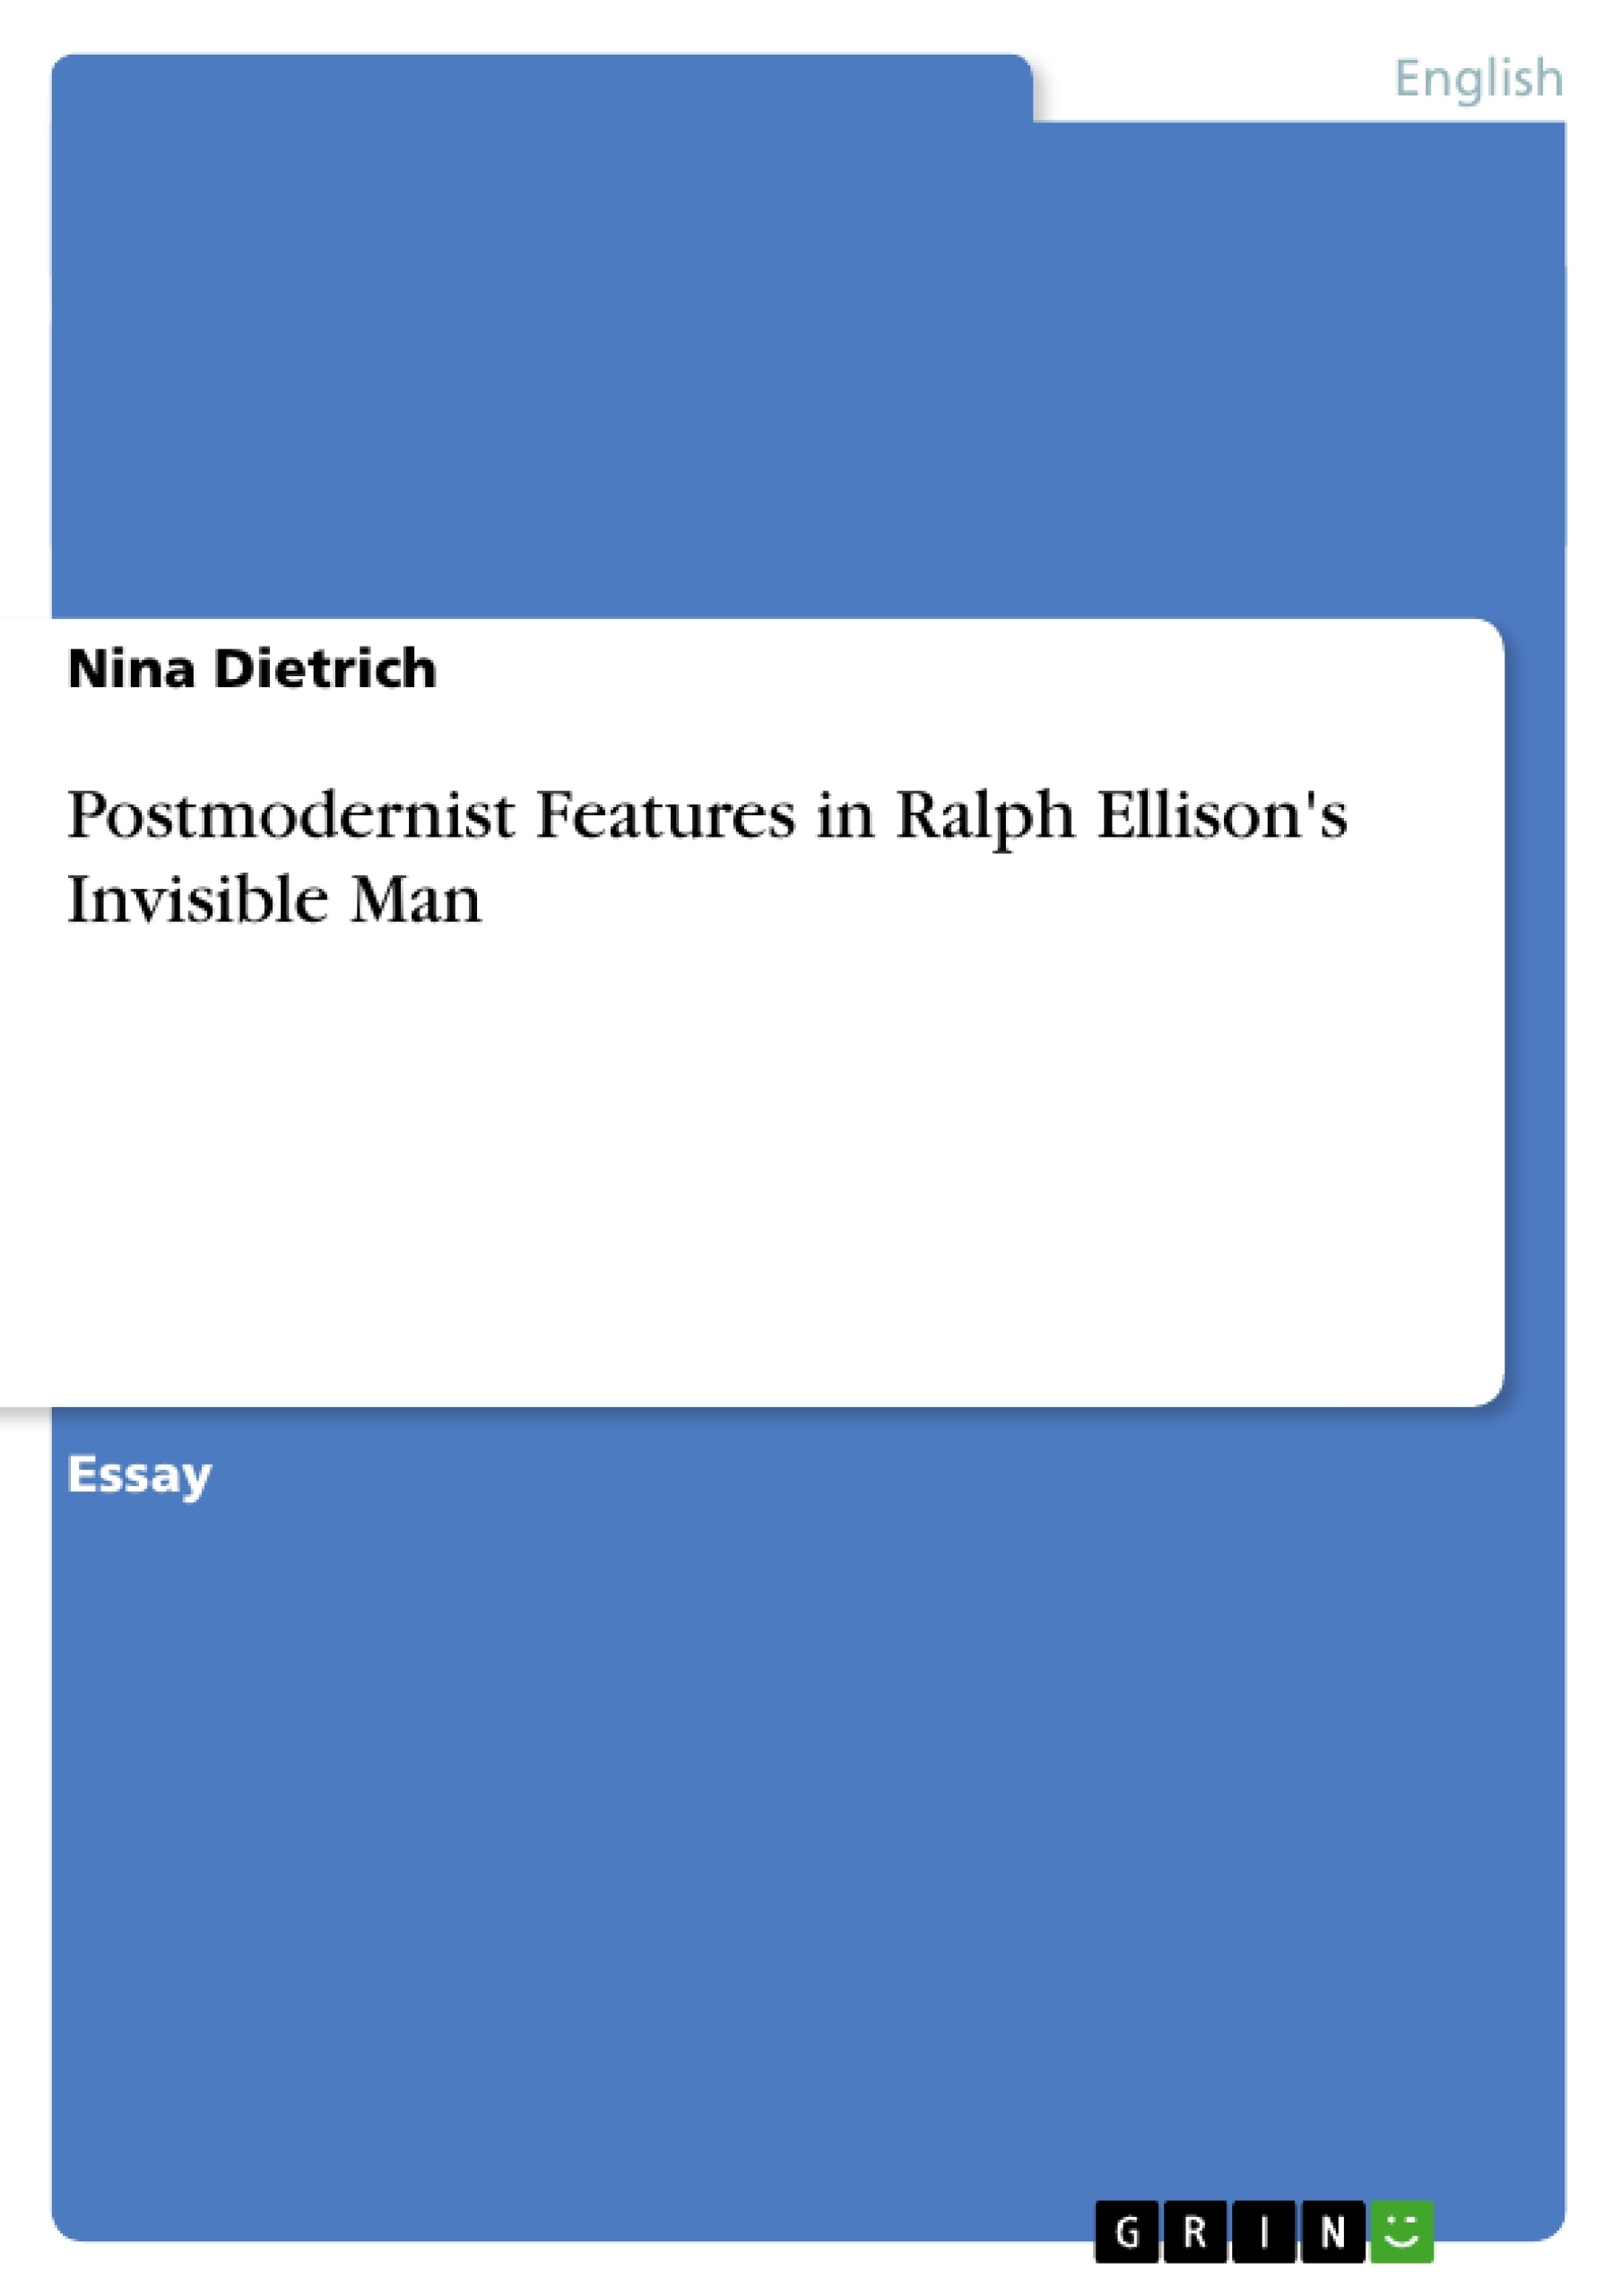 Título: Postmodernist Features in Ralph Ellison's Invisible Man